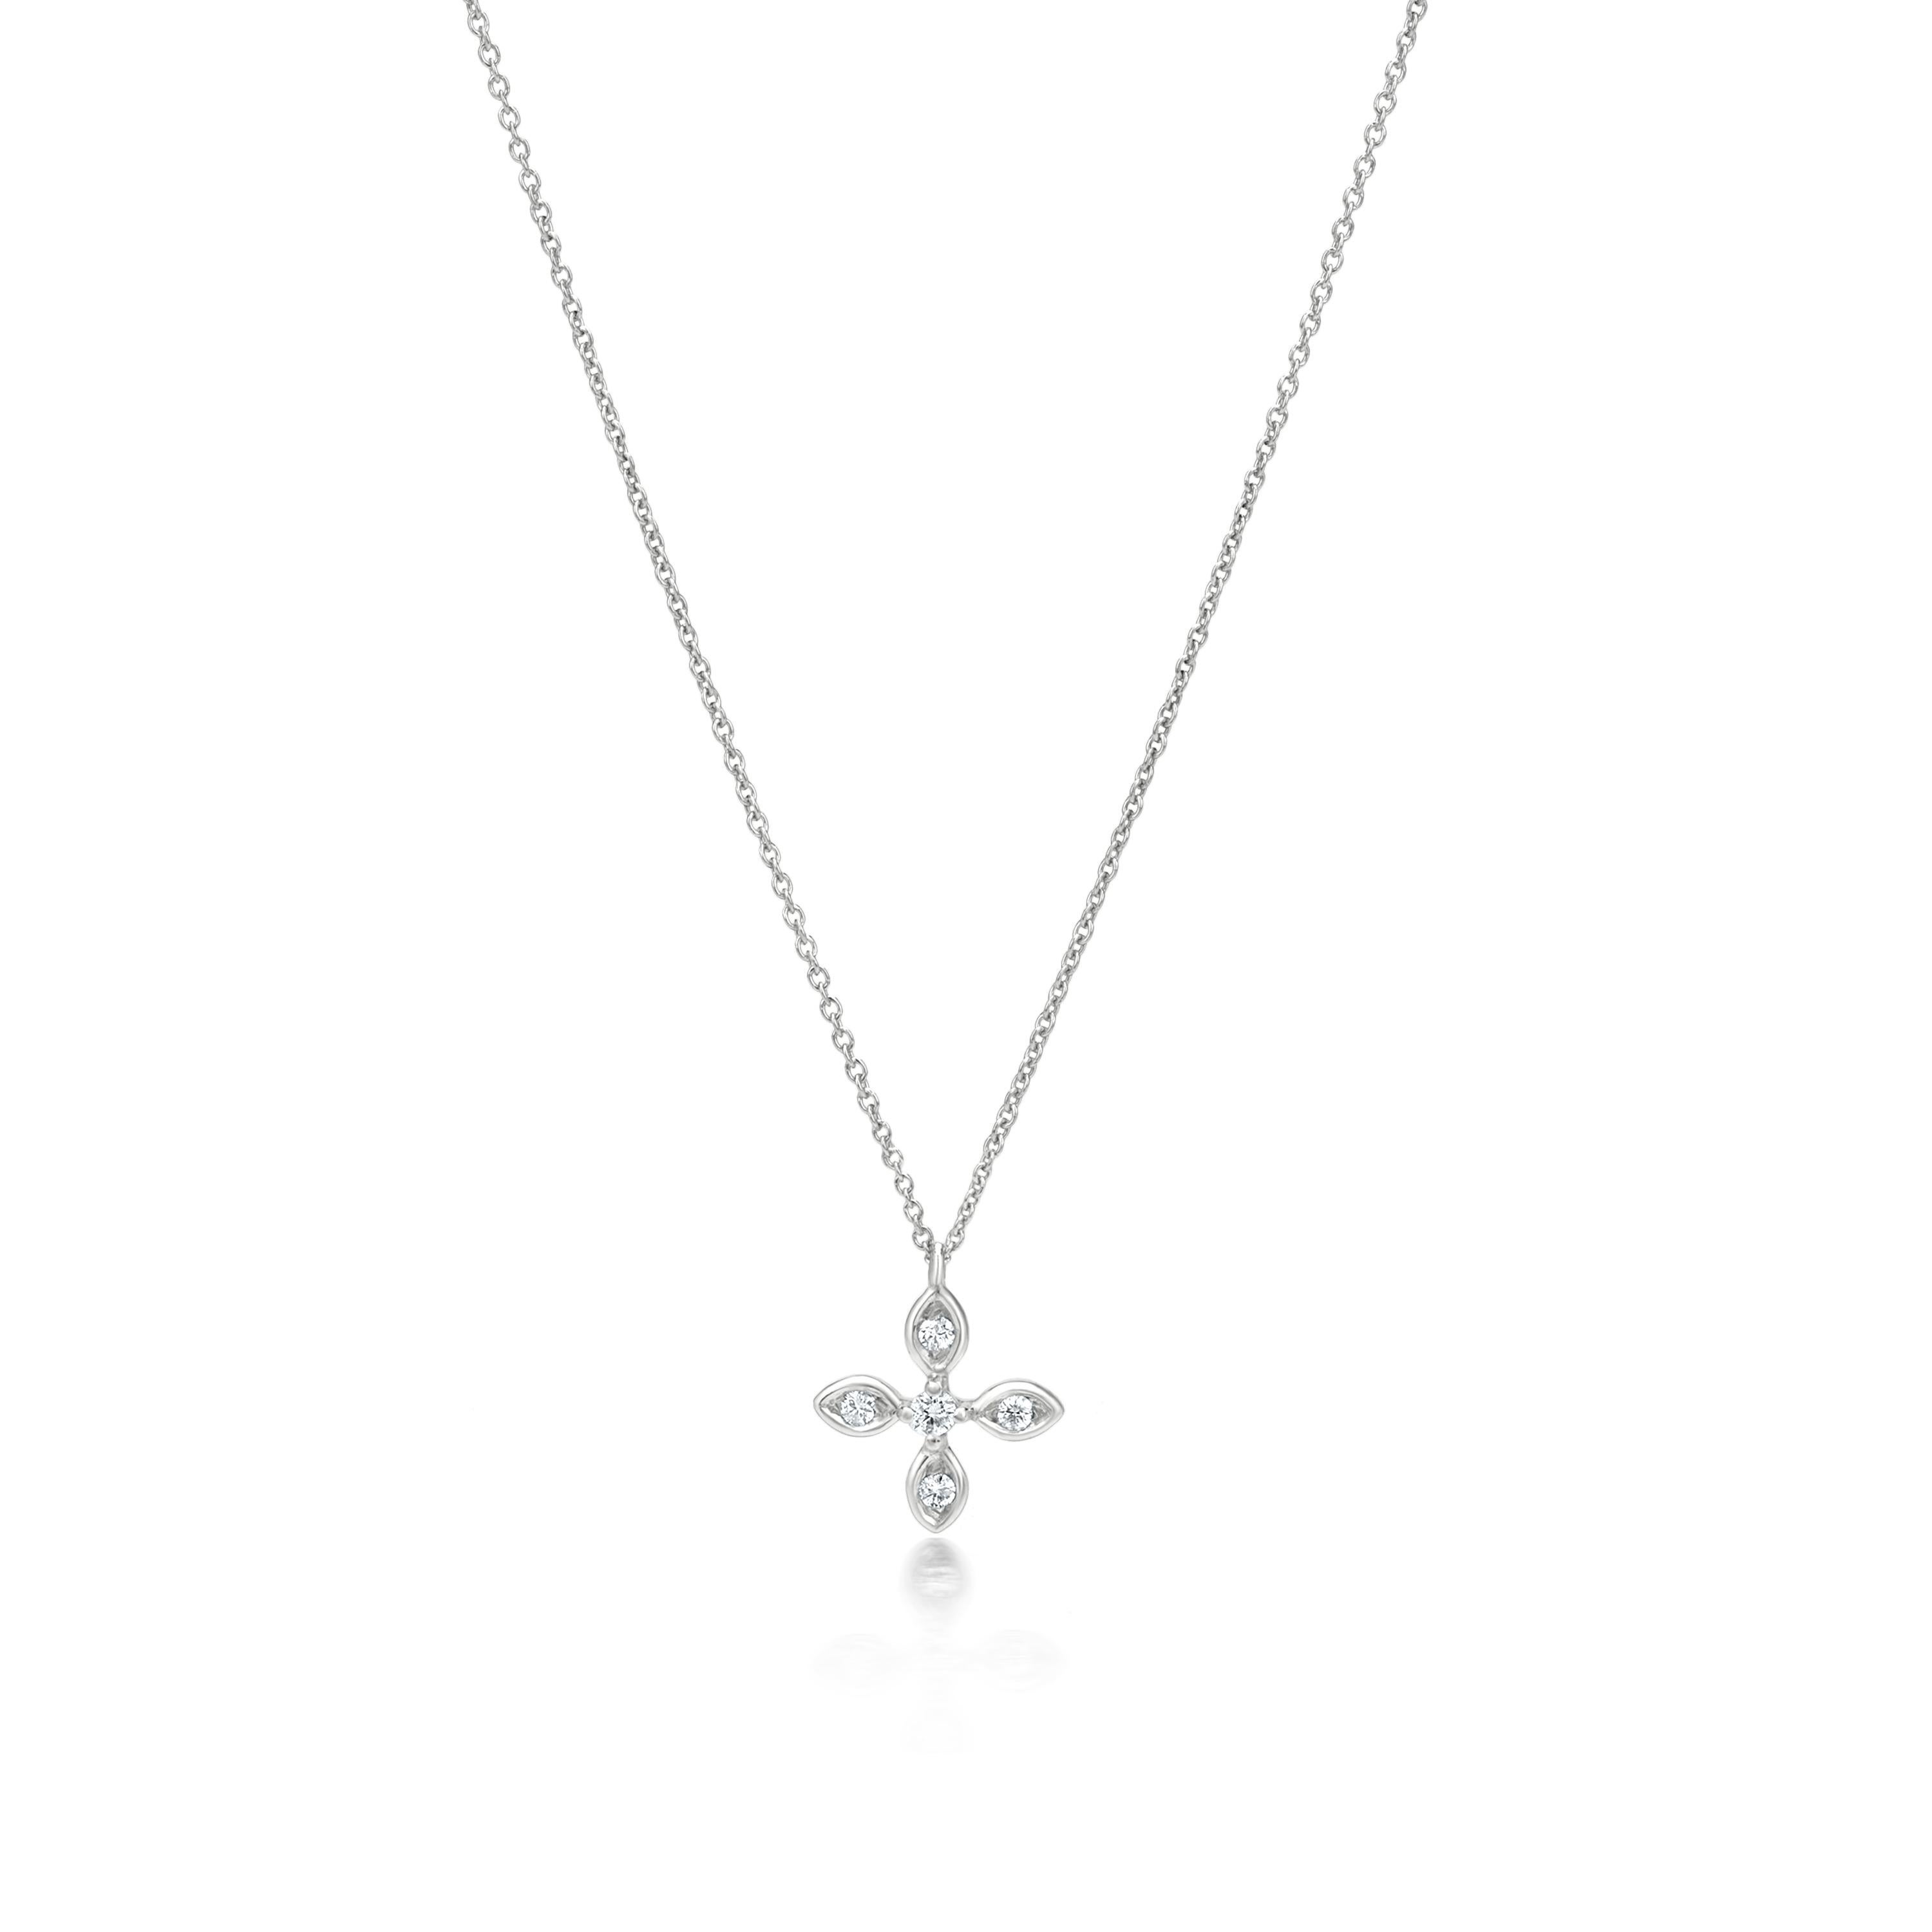 Grace your neckline with this Luxle four leaves pendant a symbol of luck with the four leaves representing faith, hope, love, and success. Subtle yet pretty this four-leaf pendant necklace is the new fashion statement. This gorgeous necklace is